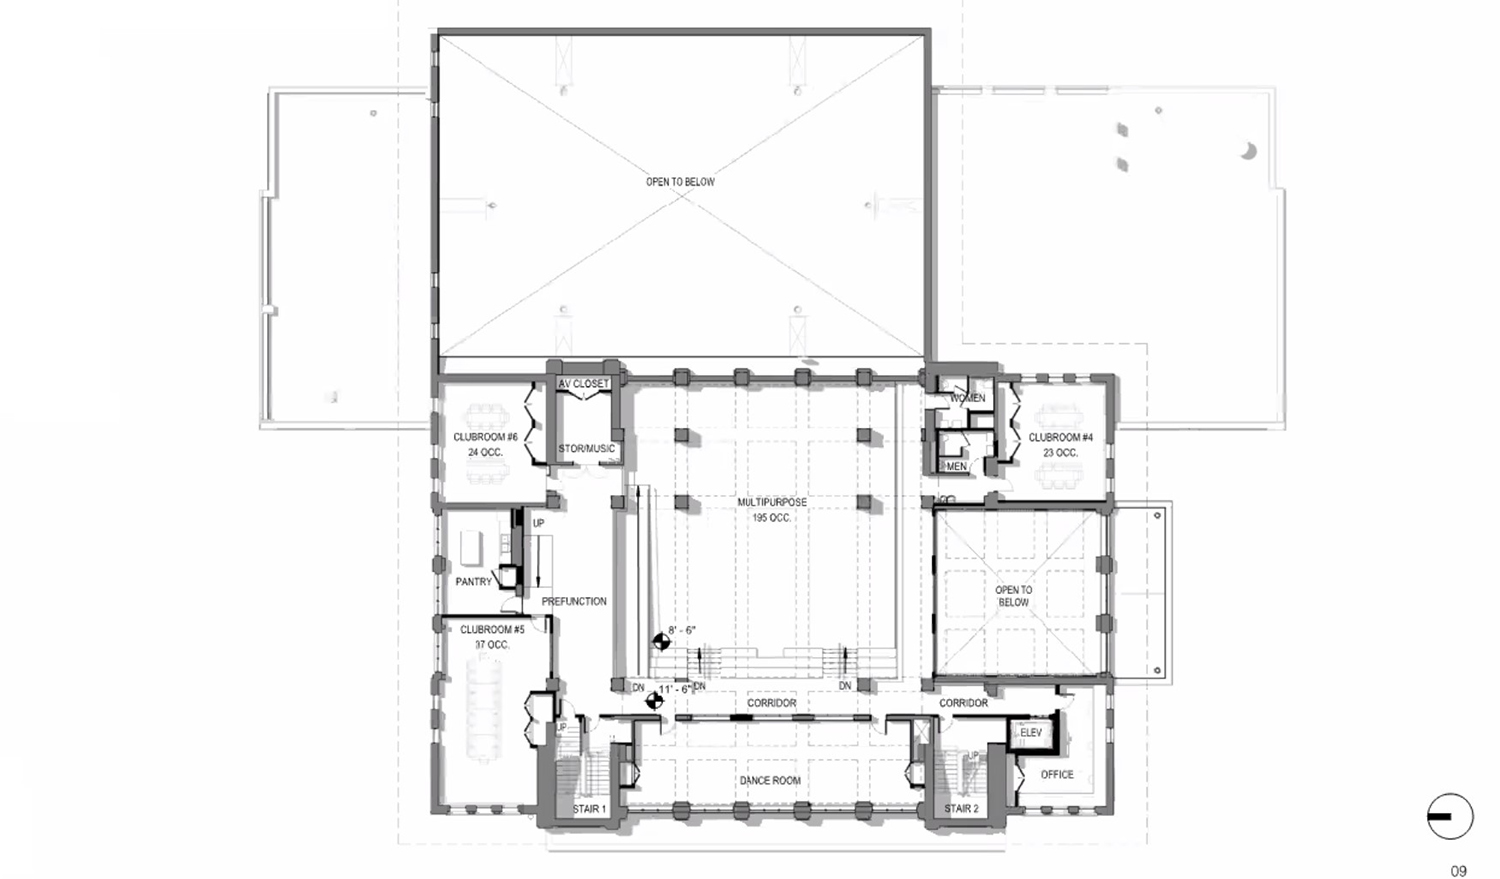 Second Floor Plan for Clarendon Community Center. Drawing by Booth Hansen